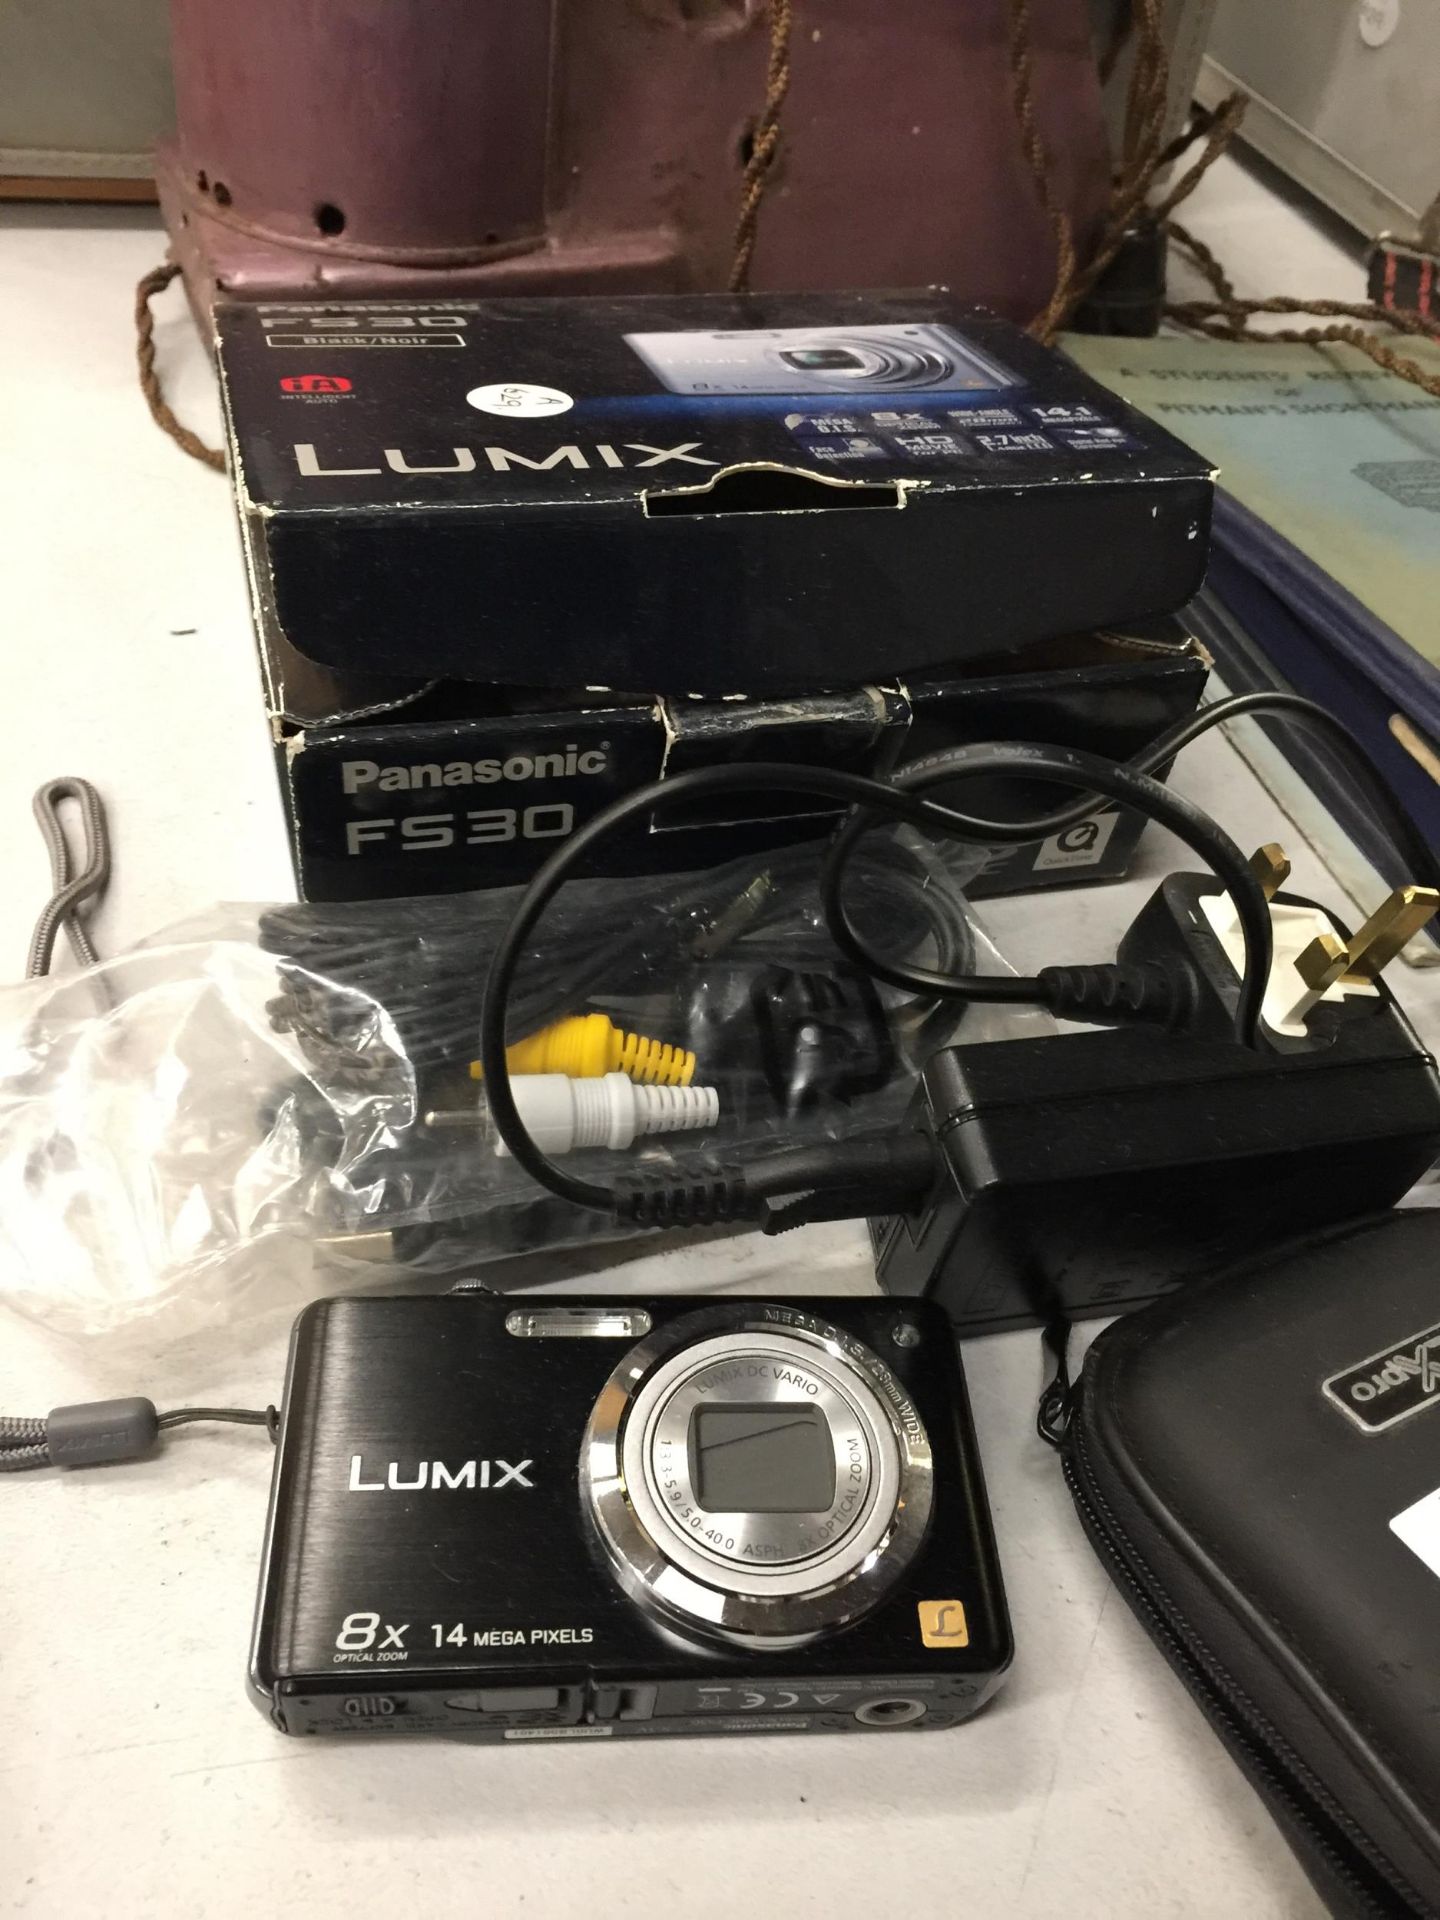 A PANASONIC LUMIX FS30 CAMERA WITH CASE, BOXED - Image 2 of 3